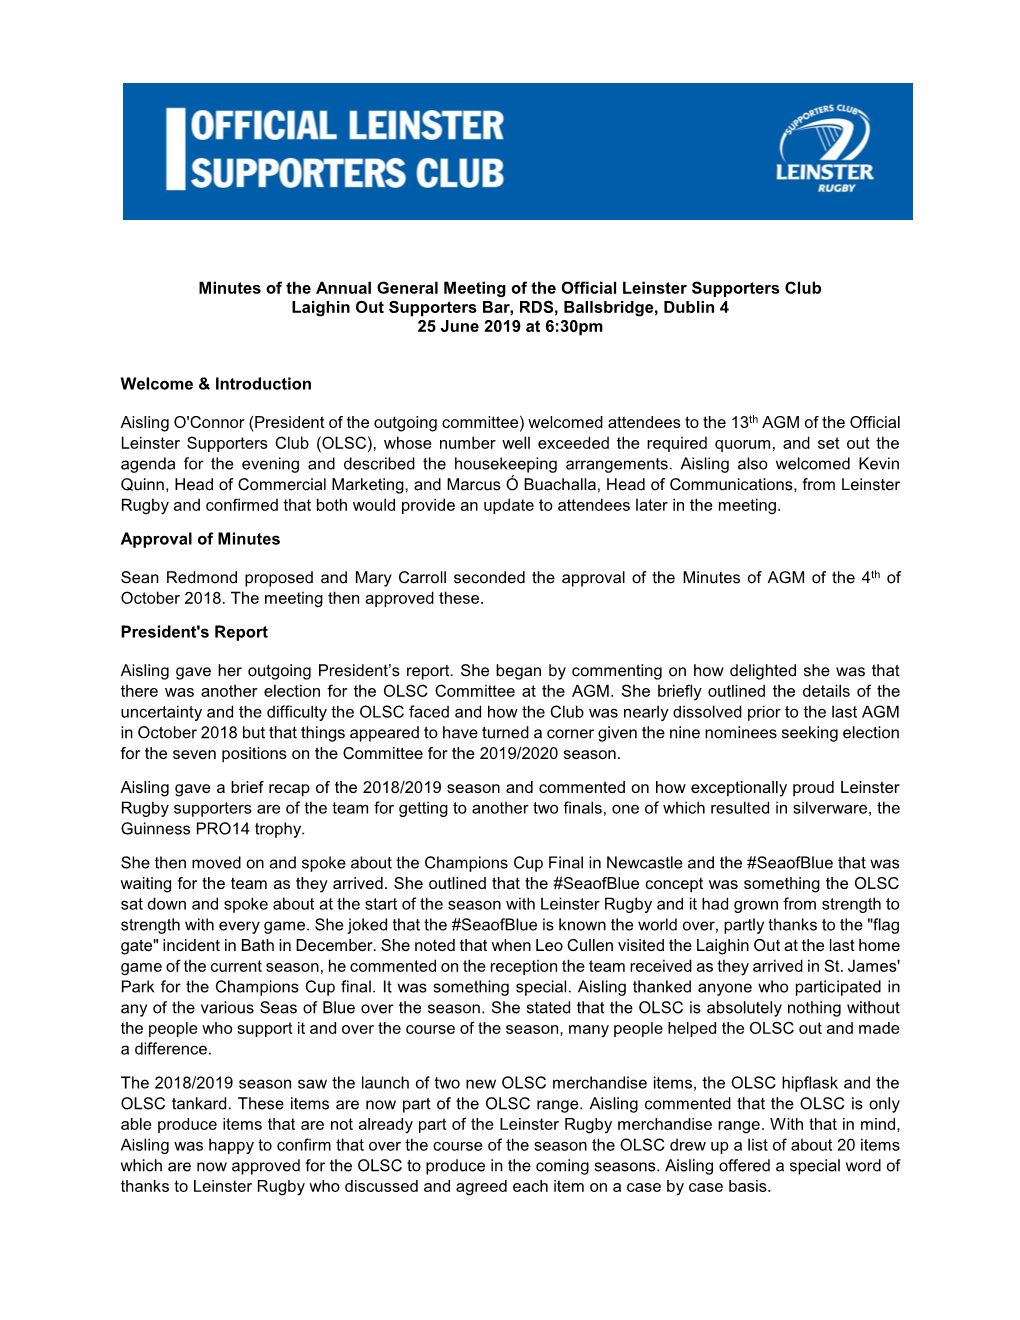 Minutes of the Annual General Meeting of the Official Leinster Supporters Club Laighin out Supporters Bar, RDS, Ballsbridge, Dublin 4 25 June 2019 at 6:30Pm